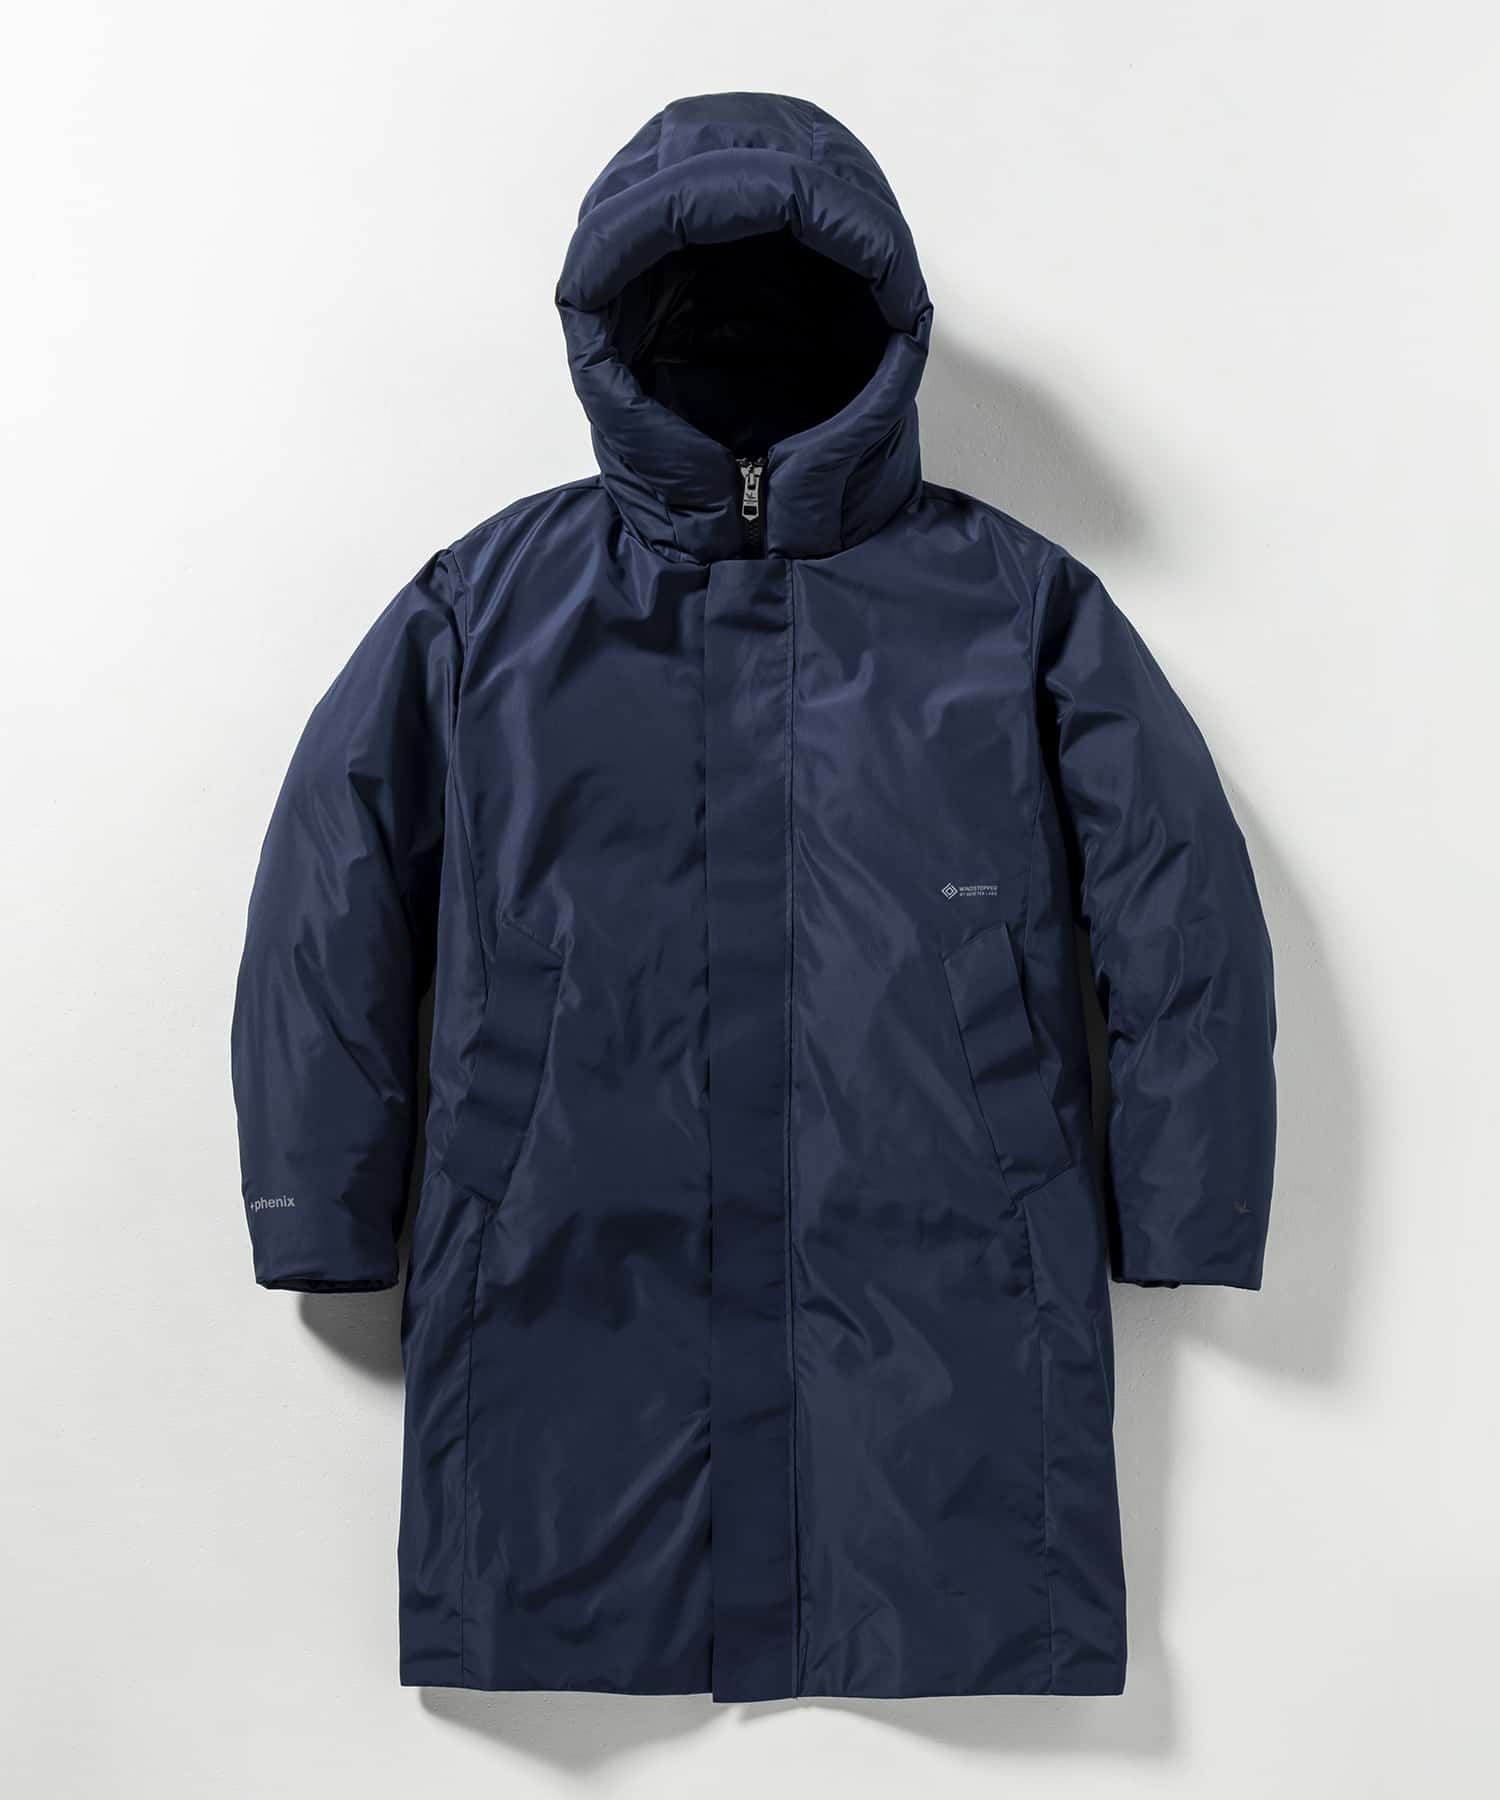 MENS】ダウンコート WINDSTOPPER(R) プロダクト by GORE-TEX LABS